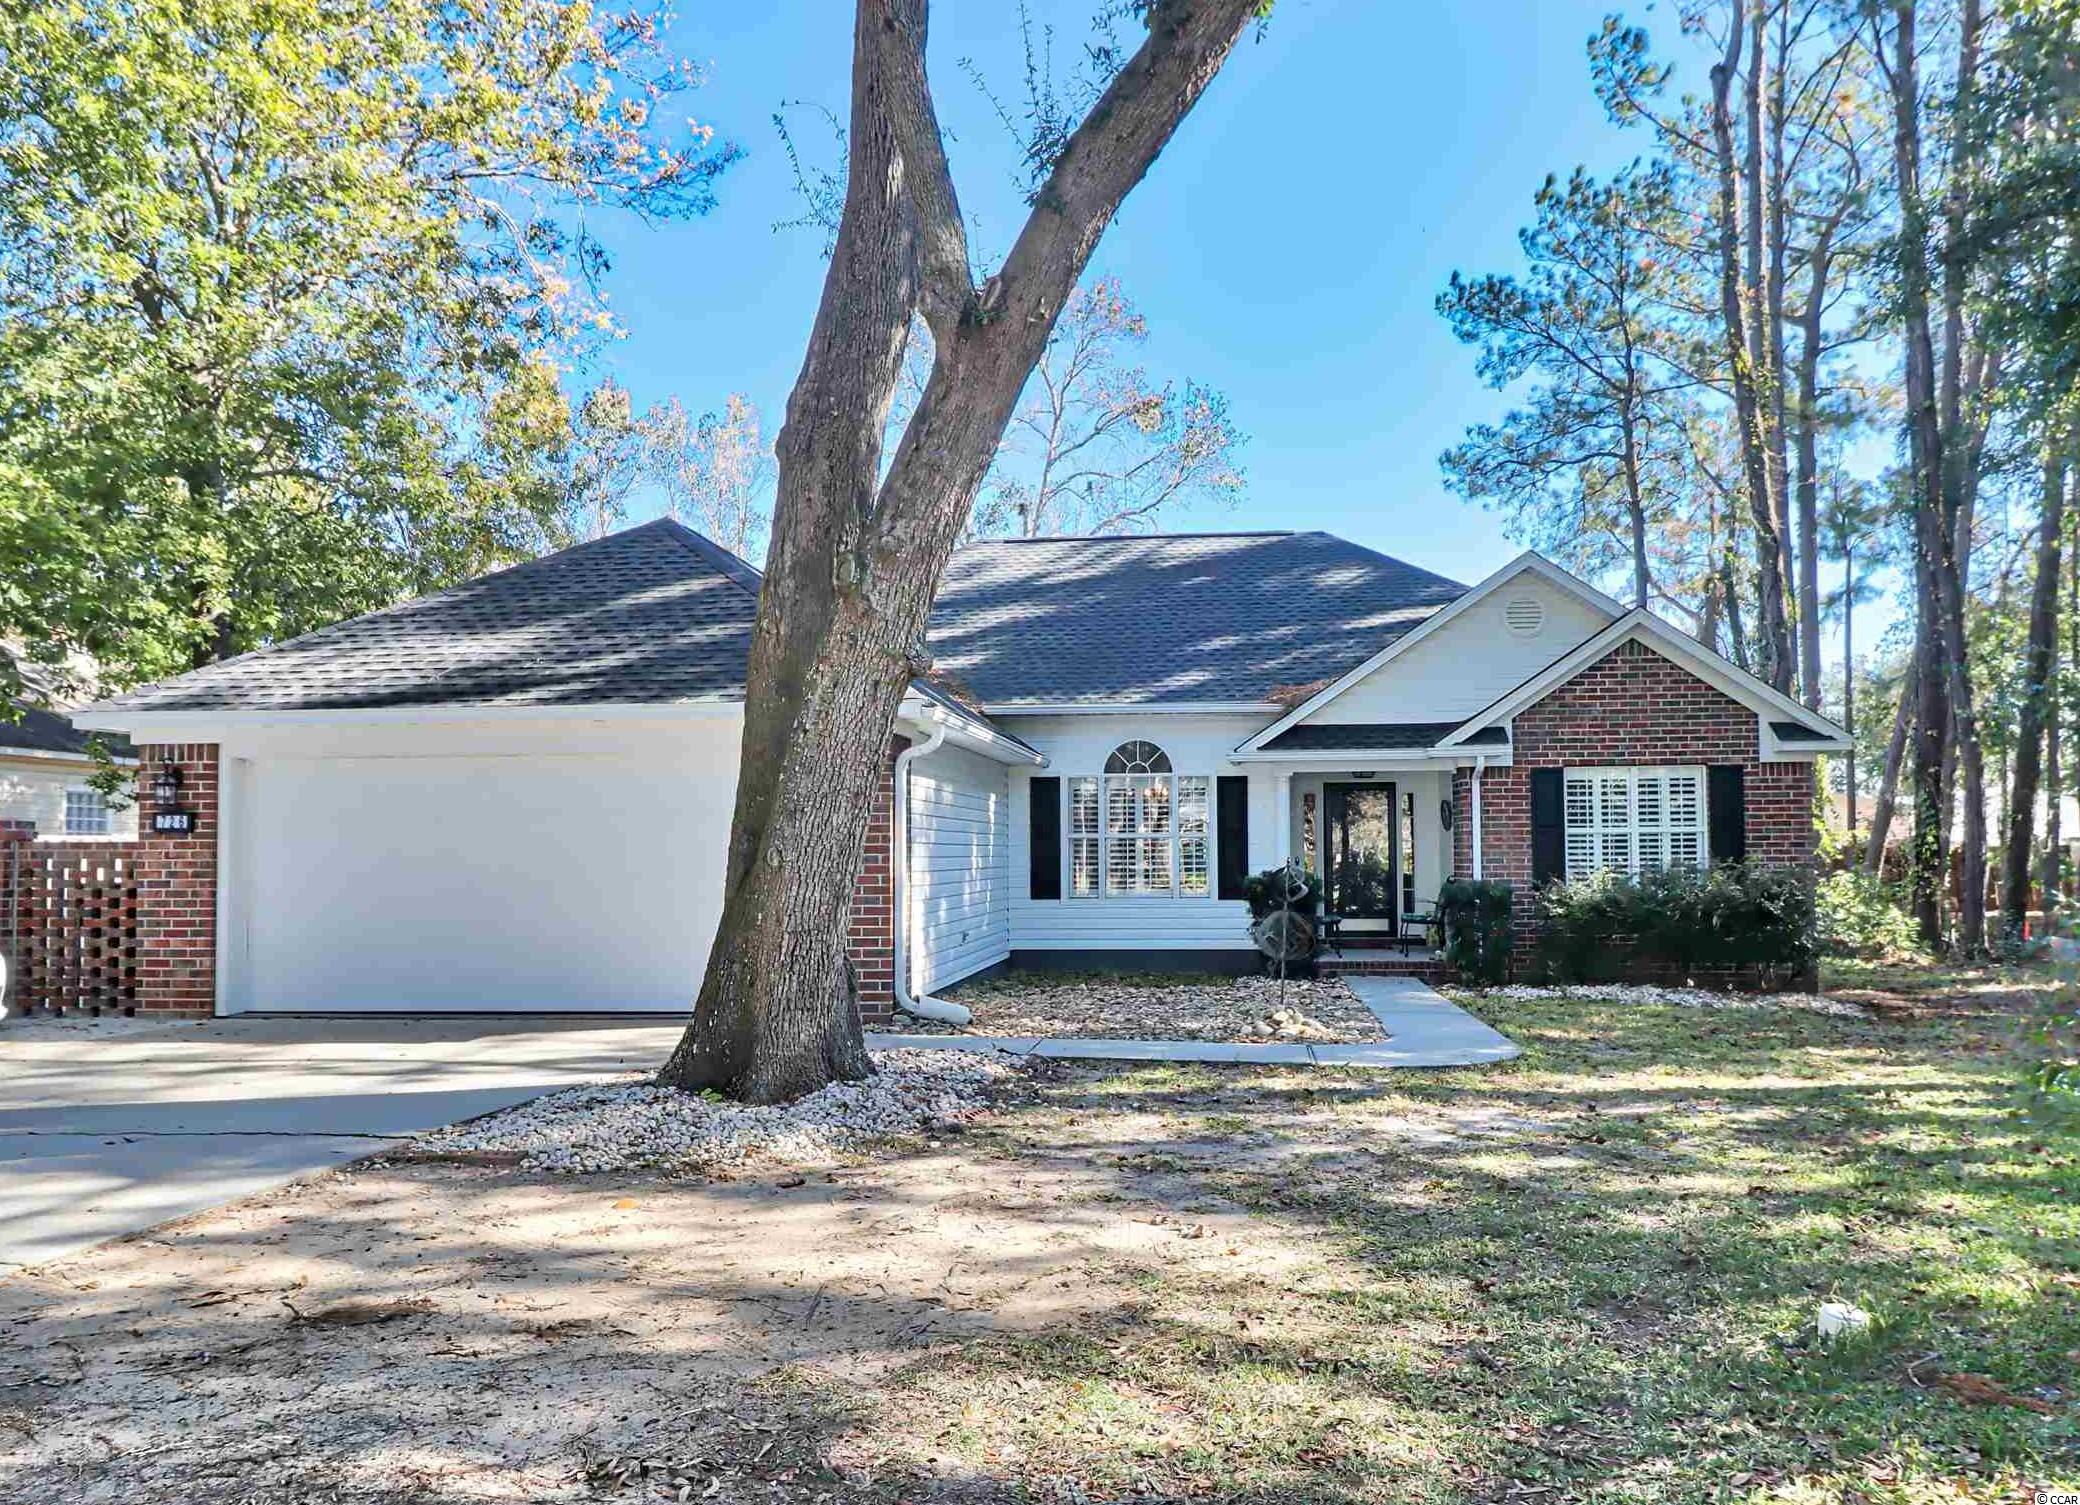 726 Mount Gilead Place Dr. Murrells Inlet, SC 29576